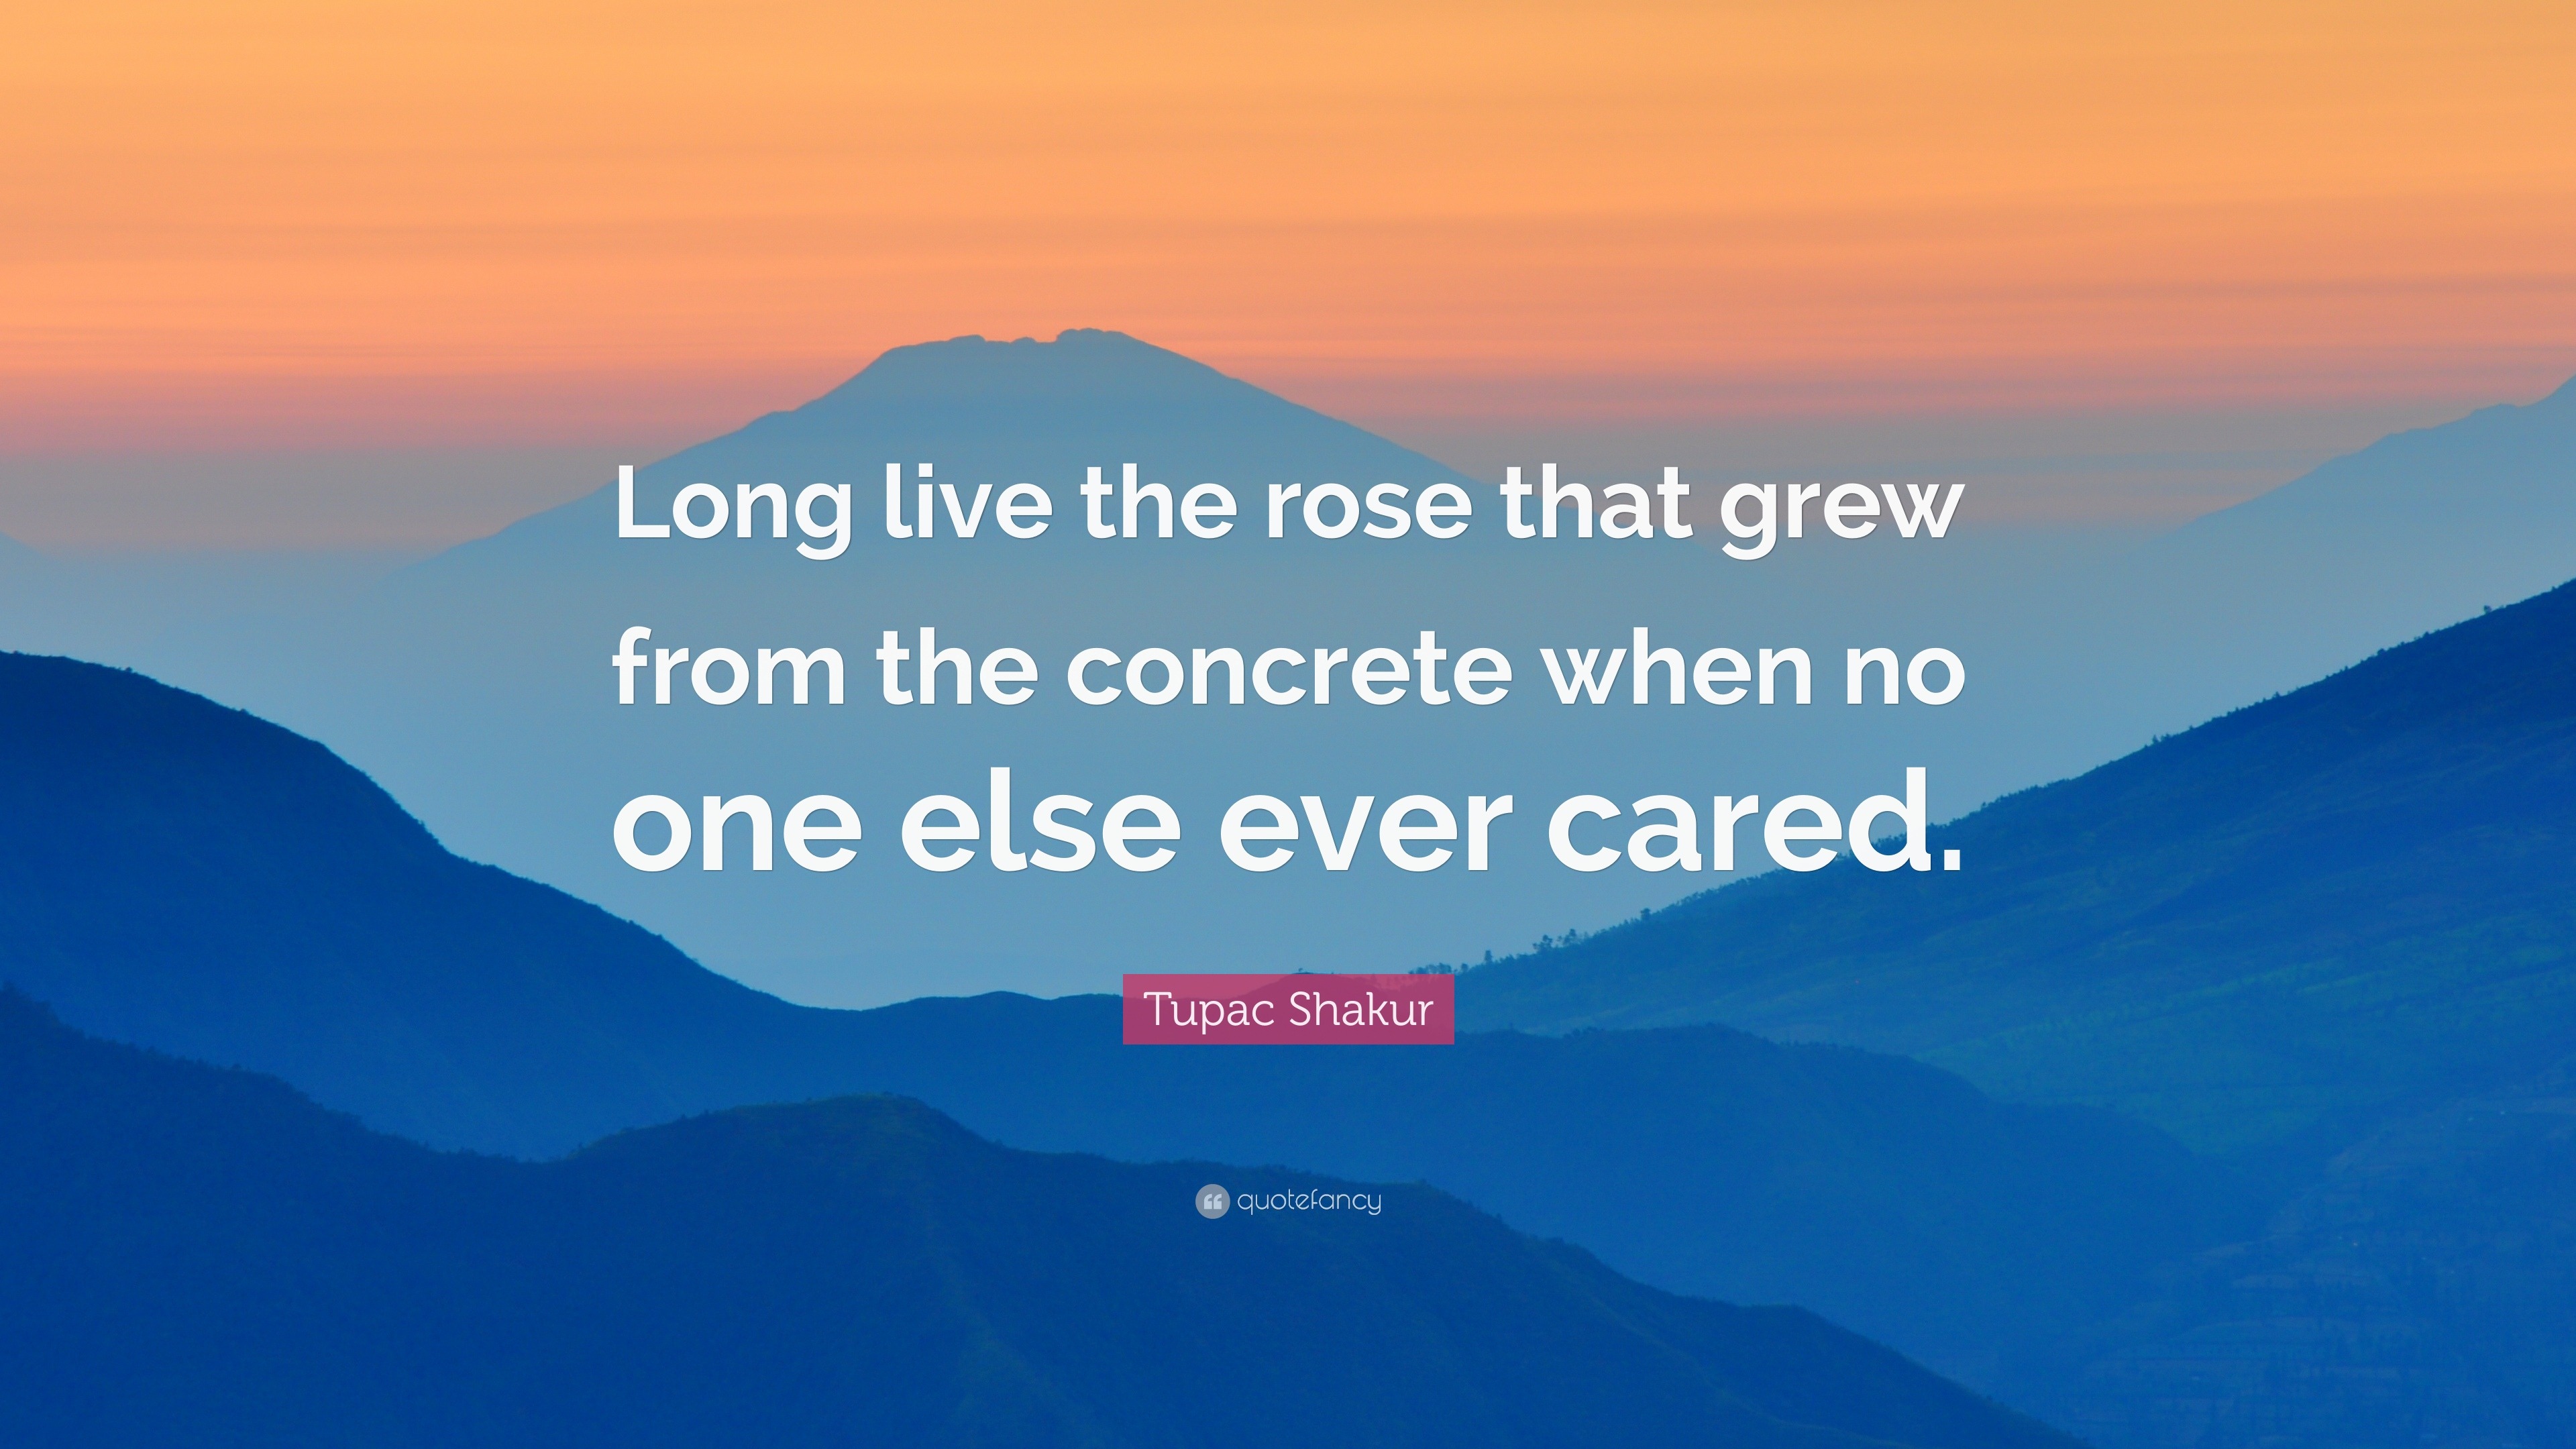 Tupac Shakur Quote: "Long live the rose that grew from the concrete when no one else ever cared."